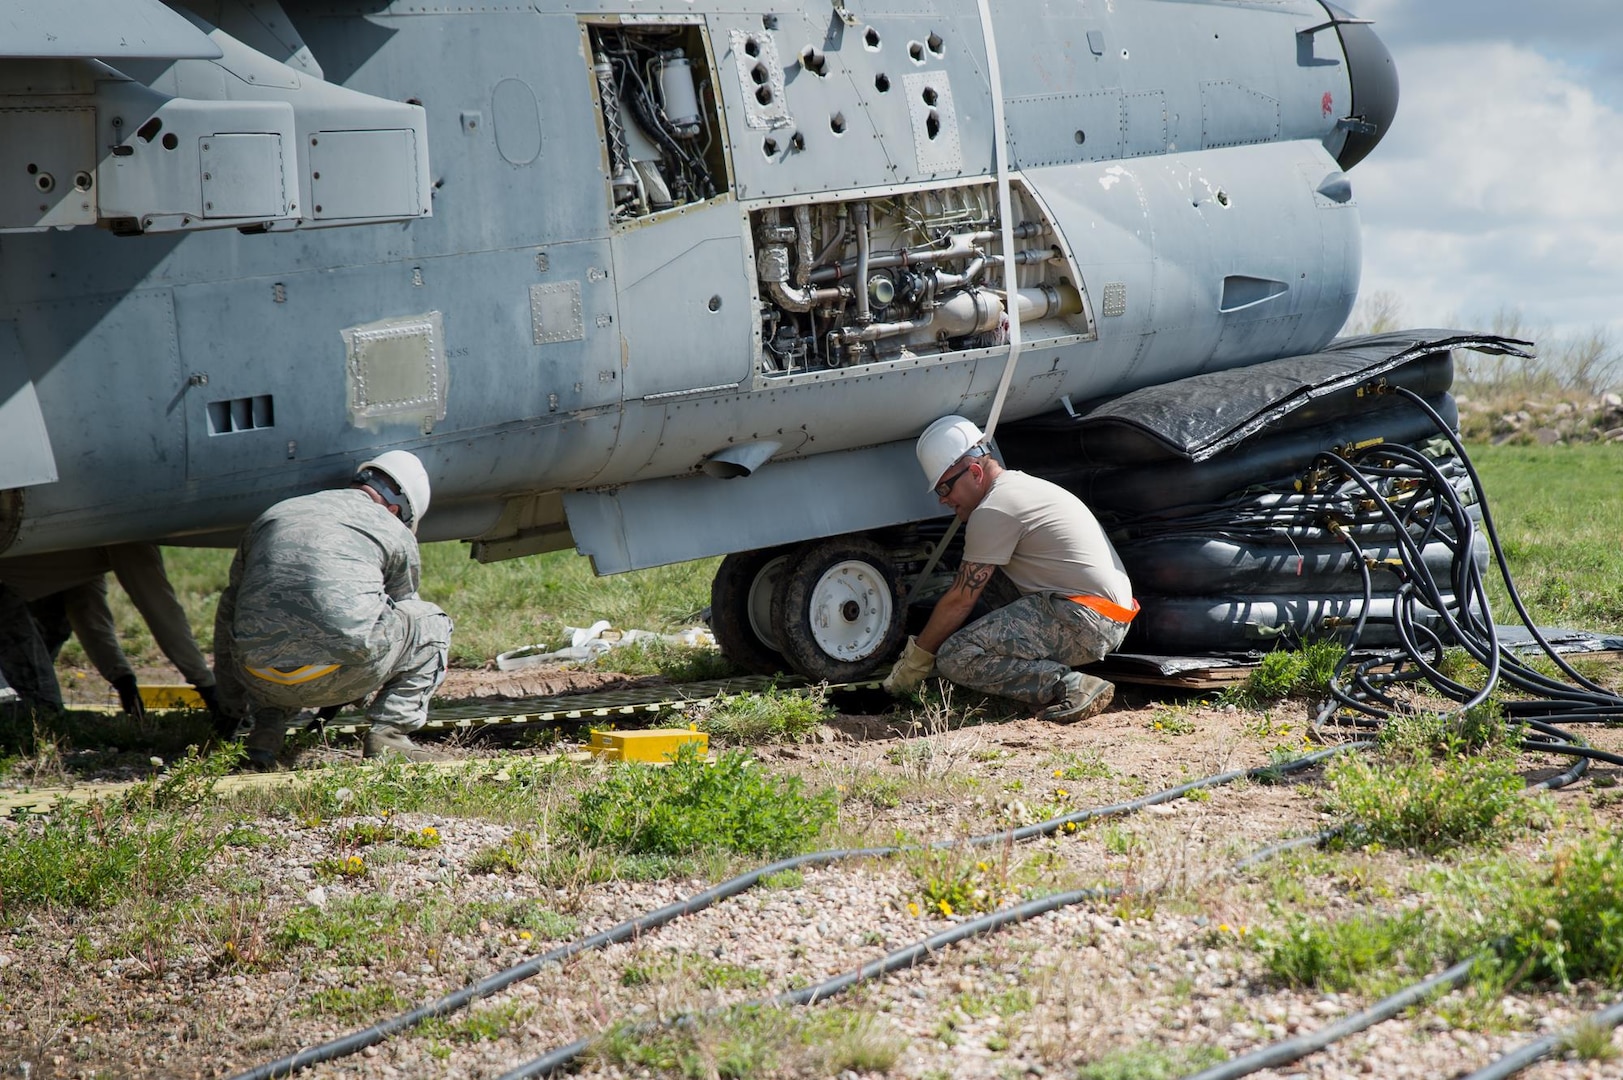 U.S. Air Force Tech. Sgt. Sean Quinlan and Staff Sgt. Aaron Berning with the 153rd Maintenance Group's Crash Damage or Disabled Aircraft Recovery team place steel planking beneath the front landing gear of an A-7 Corsair II aircraft, May 11, 2017 in Cheyenne, Wyoming. Maintainers from all aircraft specialties practiced moving a fighter aircraft from the mud into a parking spot as part of an annual CDDAR requirement. (U.S. Air National Guard photo by Senior Master Sgt. Charles Delano/released)